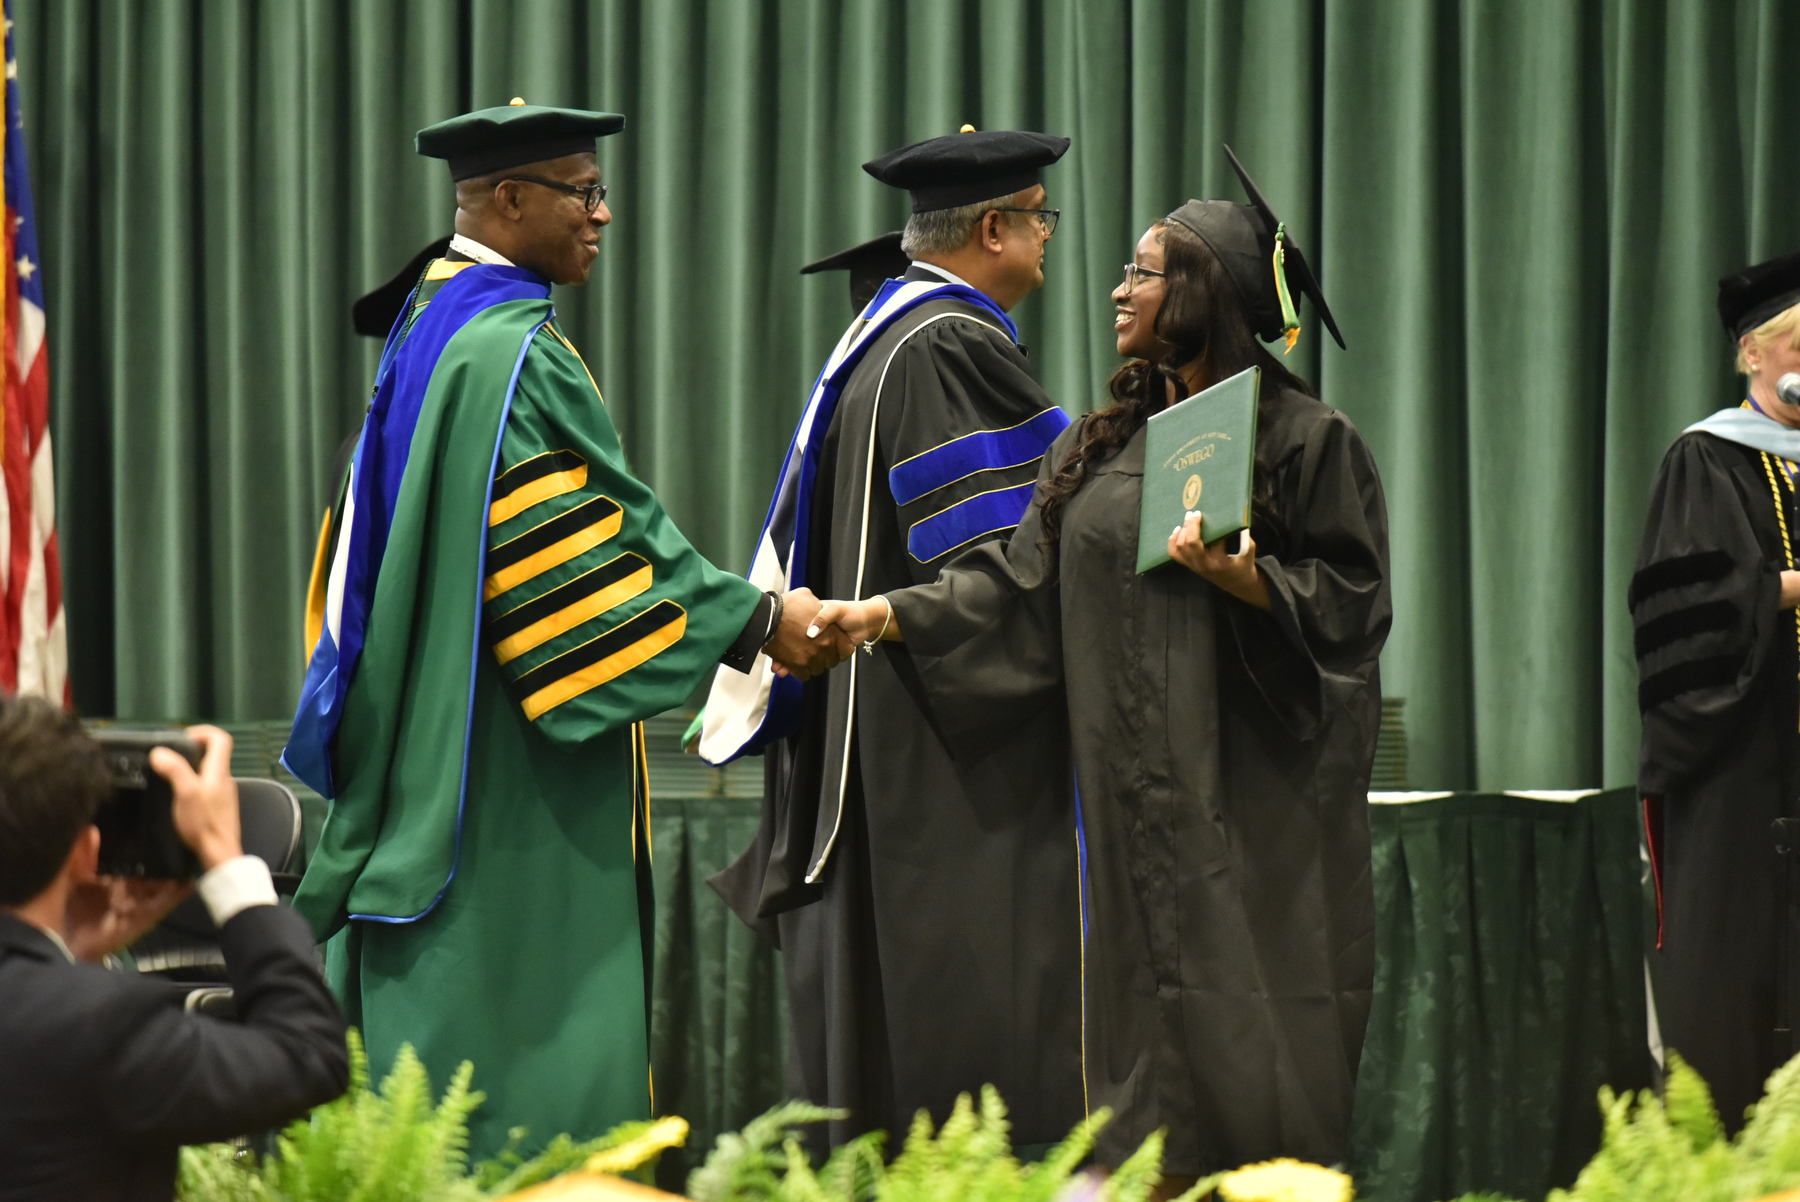 Each graduate's name is announced as they walk across the commencement platform before shaking hands with their dean –- in this case Prabakar Kothandaraman from the School of Business –- and President Peter O. Nwosu.